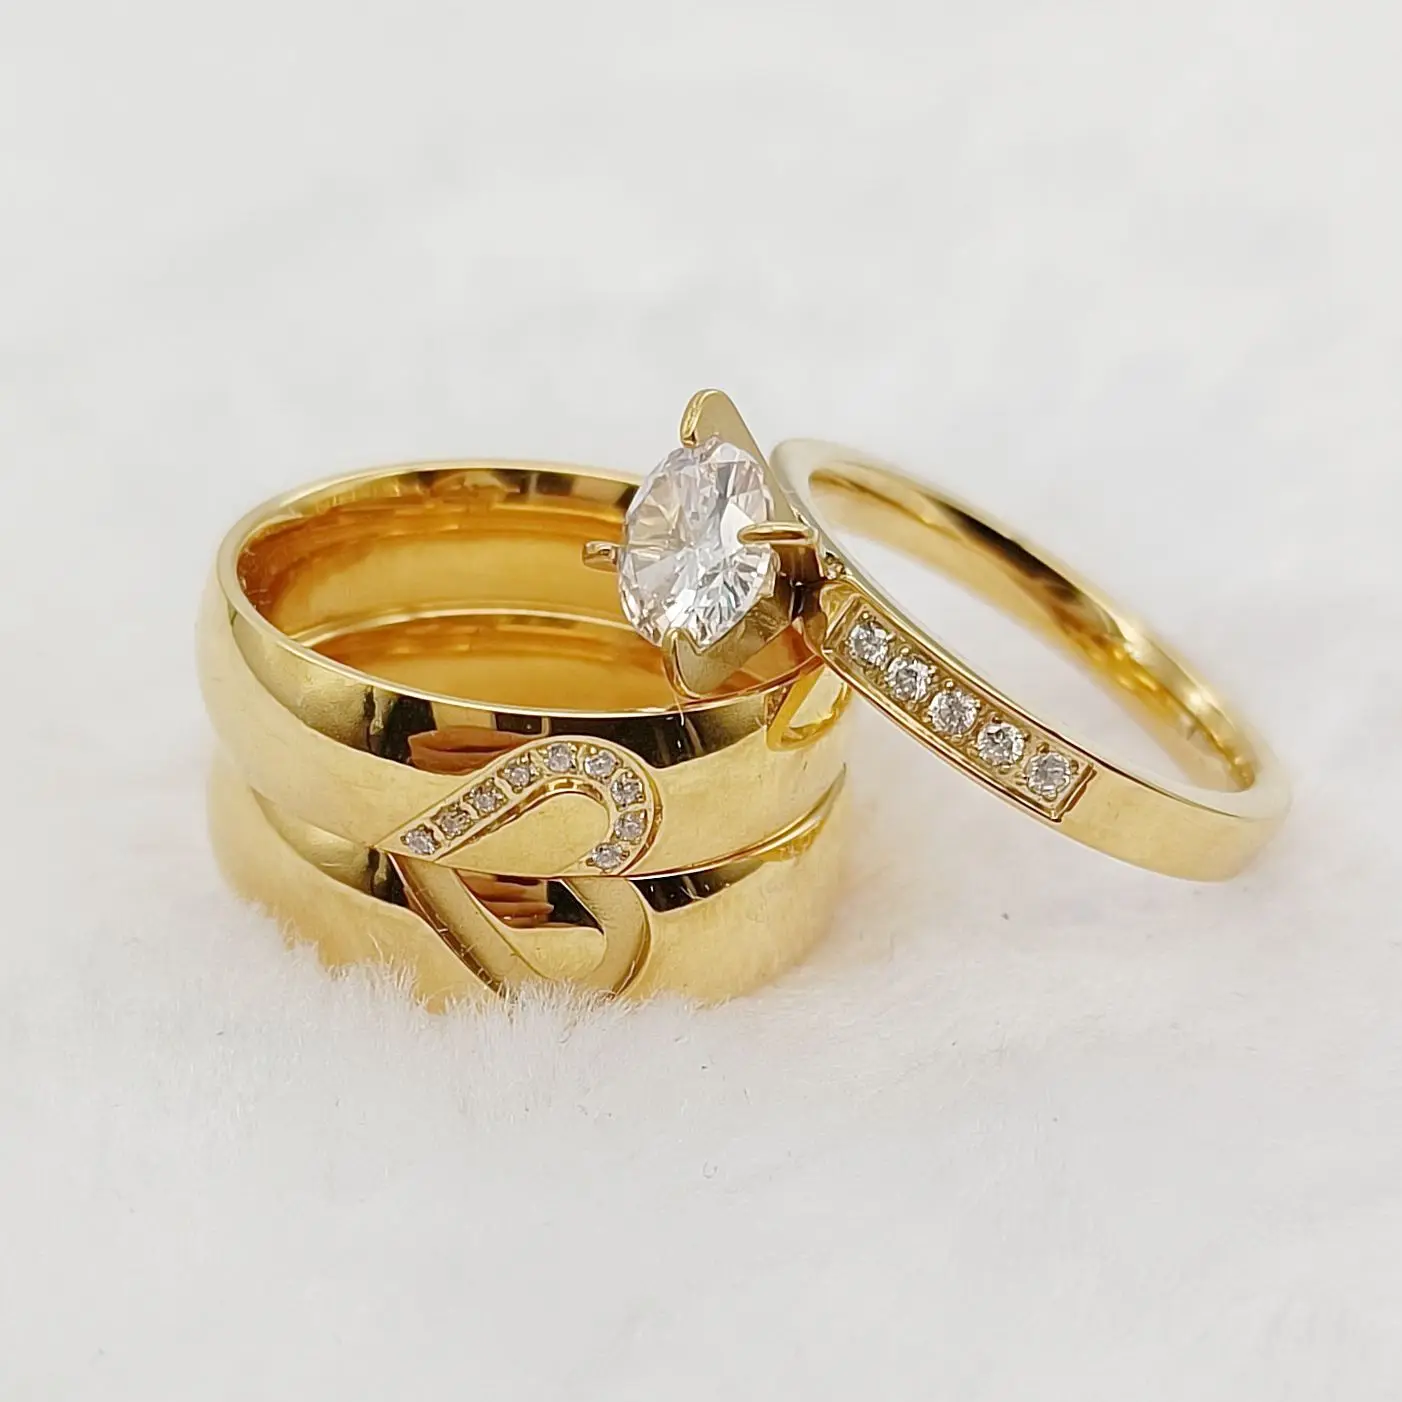 Buy quality 22kt gold casting heart shape couple ring in Chennai